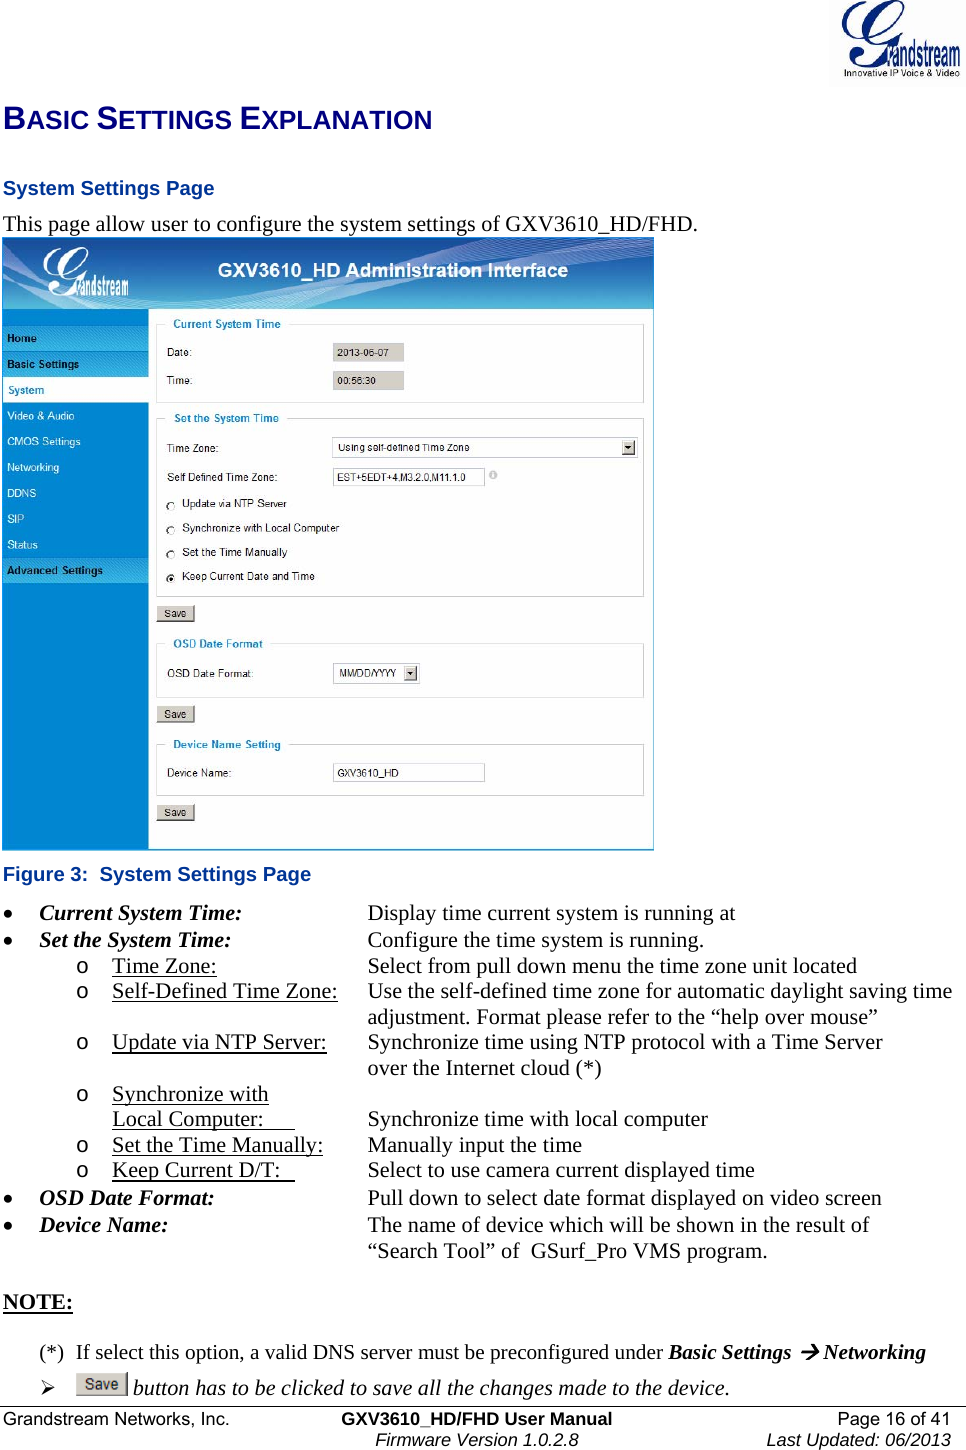  Grandstream Networks, Inc.  GXV3610_HD/FHD User Manual  Page 16 of 41    Firmware Version 1.0.2.8  Last Updated: 06/2013  BASIC SETTINGS EXPLANATION  System Settings Page  This page allow user to configure the system settings of GXV3610_HD/FHD.  Figure 3:  System Settings Page • Current System Time:     Display time current system is running at • Set the System Time:     Configure the time system is running.  o Time Zone:     Select from pull down menu the time zone unit located o Self-Defined Time Zone:   Use the self-defined time zone for automatic daylight saving time adjustment. Format please refer to the “help over mouse”  o Update via NTP Server:   Synchronize time using NTP protocol with a Time Server over the Internet cloud (*) o Synchronize with  Local Computer:    Synchronize time with local computer  o Set the Time Manually: Manually input the time o Keep Current D/T:    Select to use camera current displayed time • OSD Date Format:     Pull down to select date format displayed on video screen • Device Name:       The name of device which will be shown in the result of “Search Tool” of  GSurf_Pro VMS program.  NOTE:   (*)  If select this option, a valid DNS server must be preconfigured under Basic Settings Æ Networking ¾  button has to be clicked to save all the changes made to the device.  